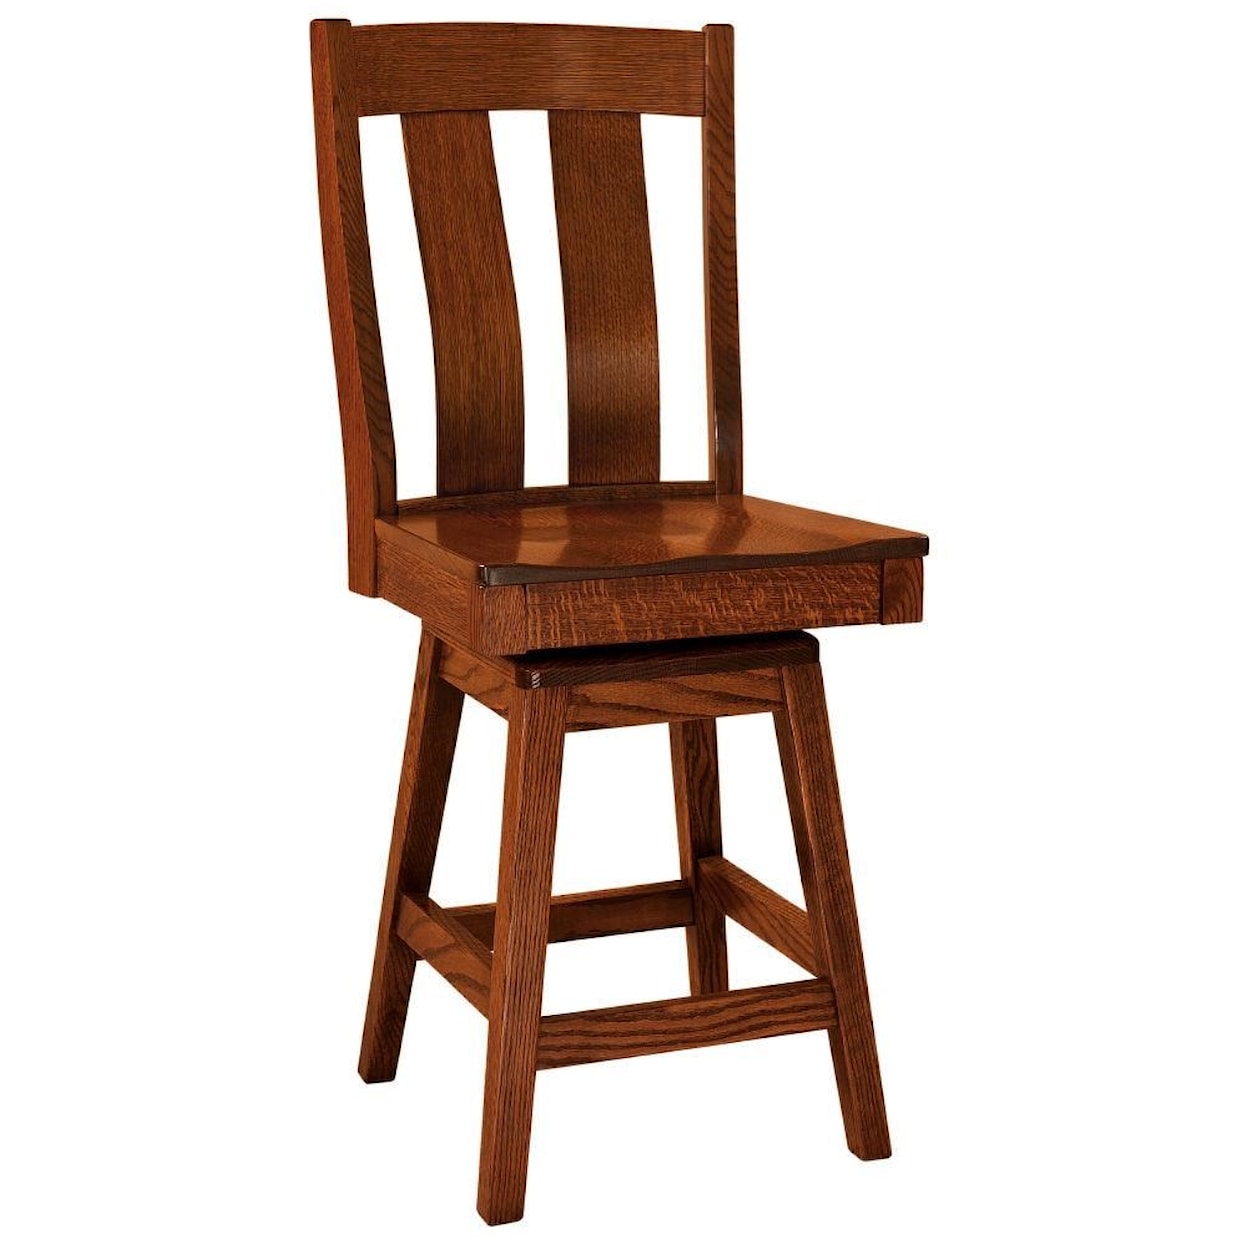 F&N Woodworking Laurie 24" Swivel Stool